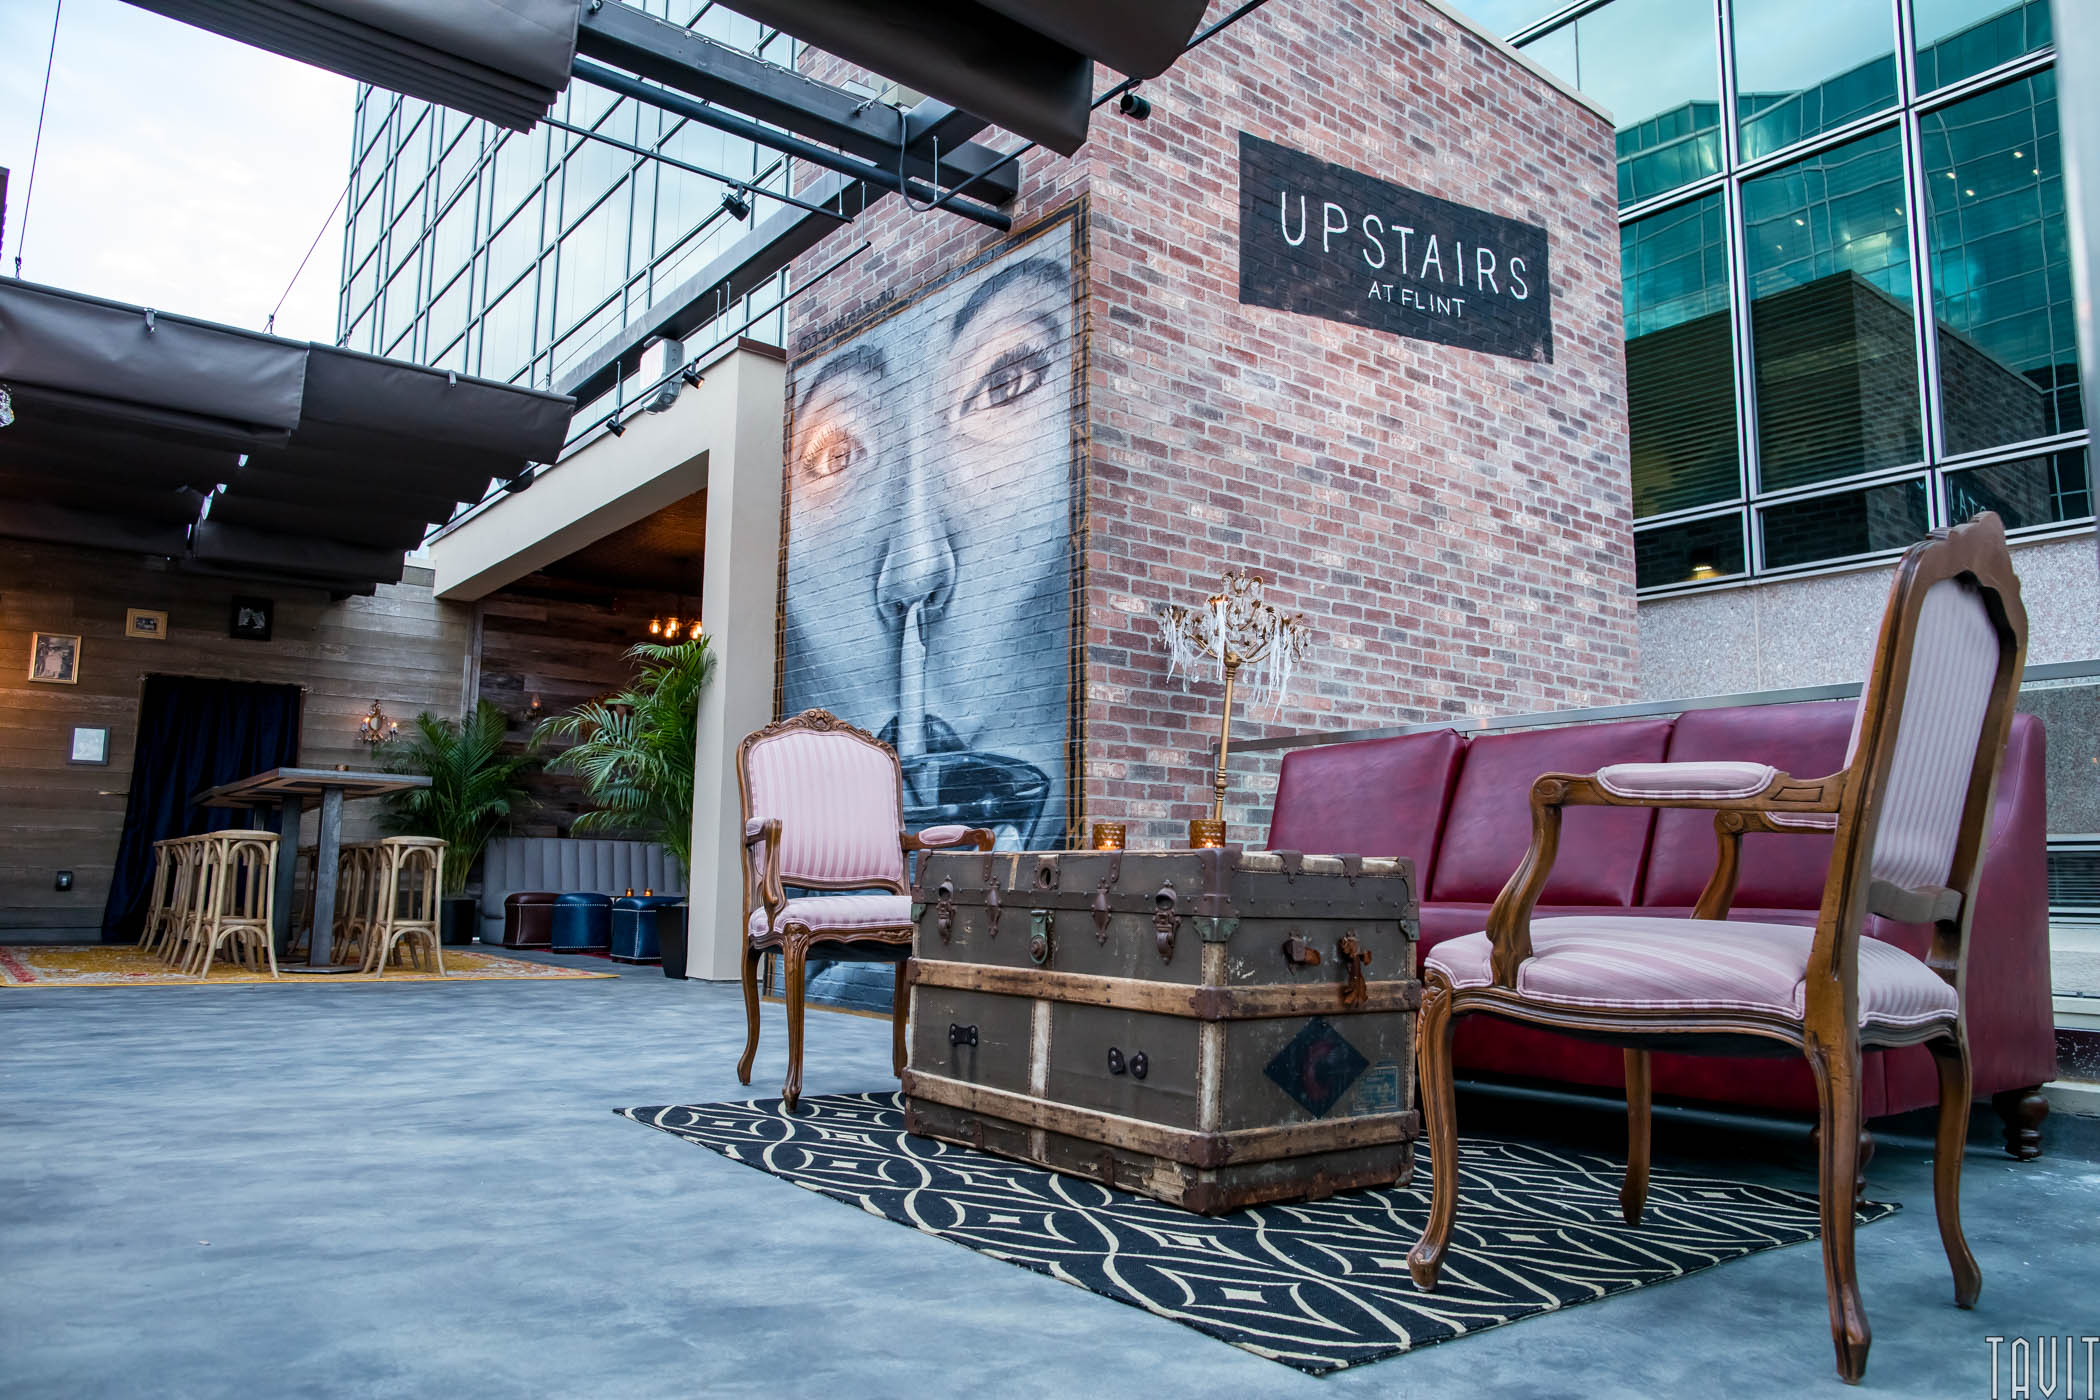 Rooftop bar seating area